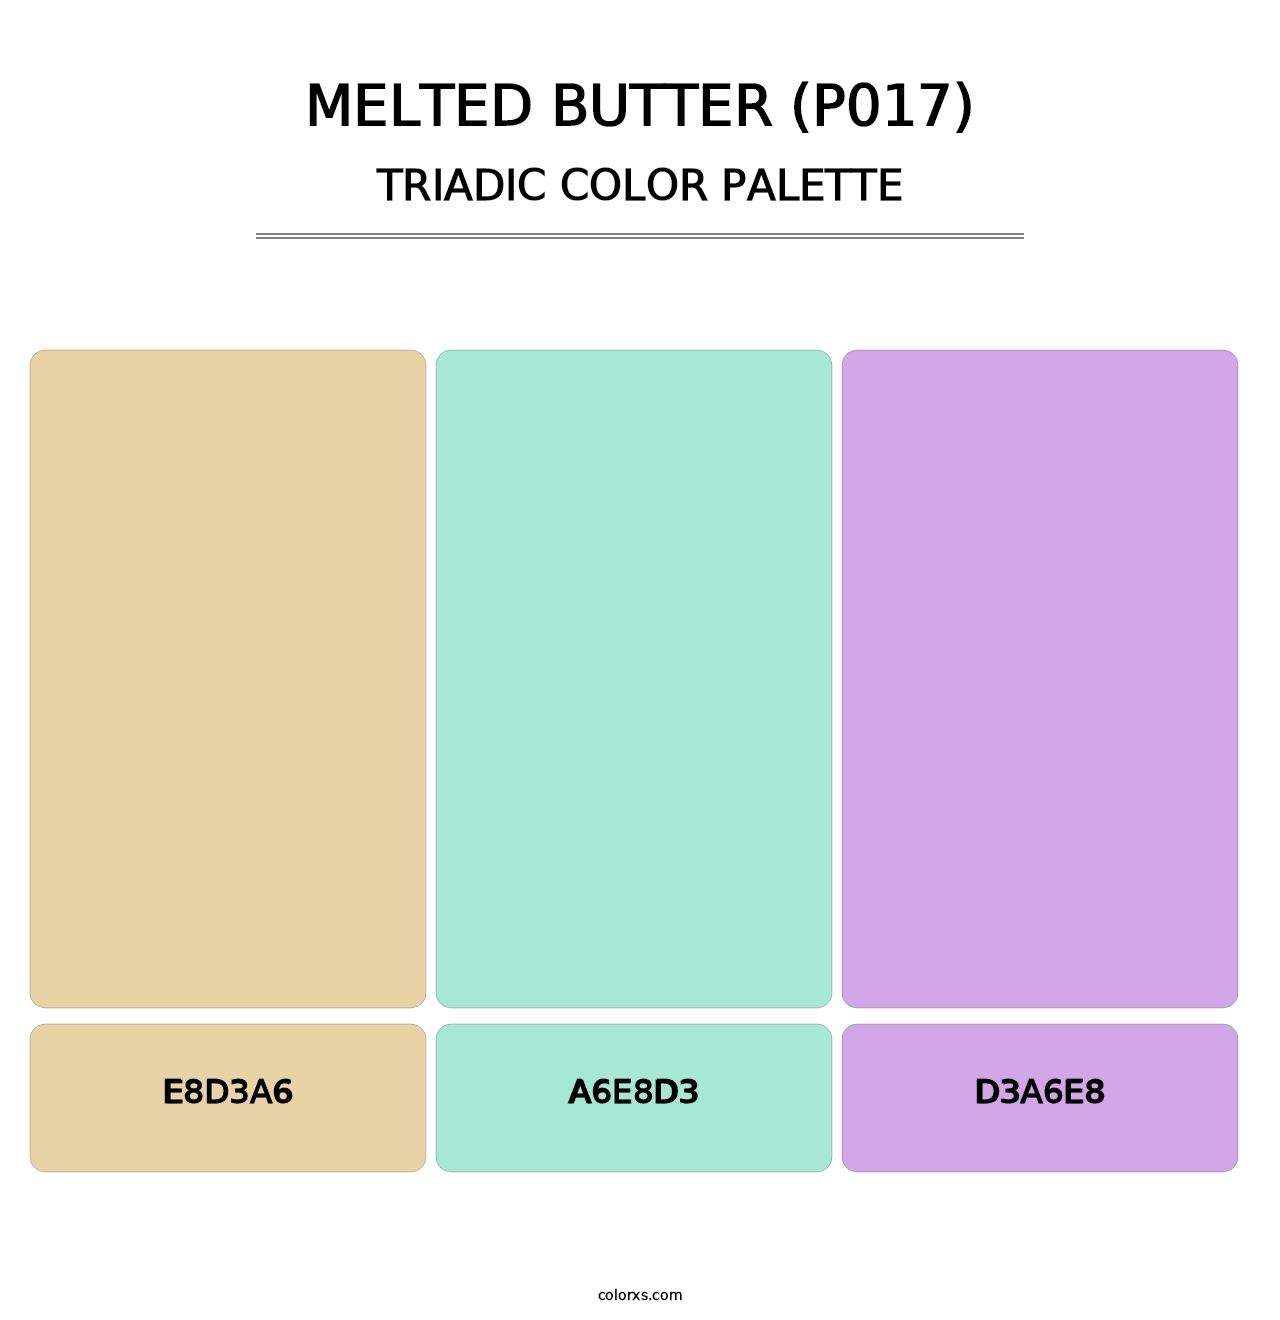 Melted Butter (P017) - Triadic Color Palette